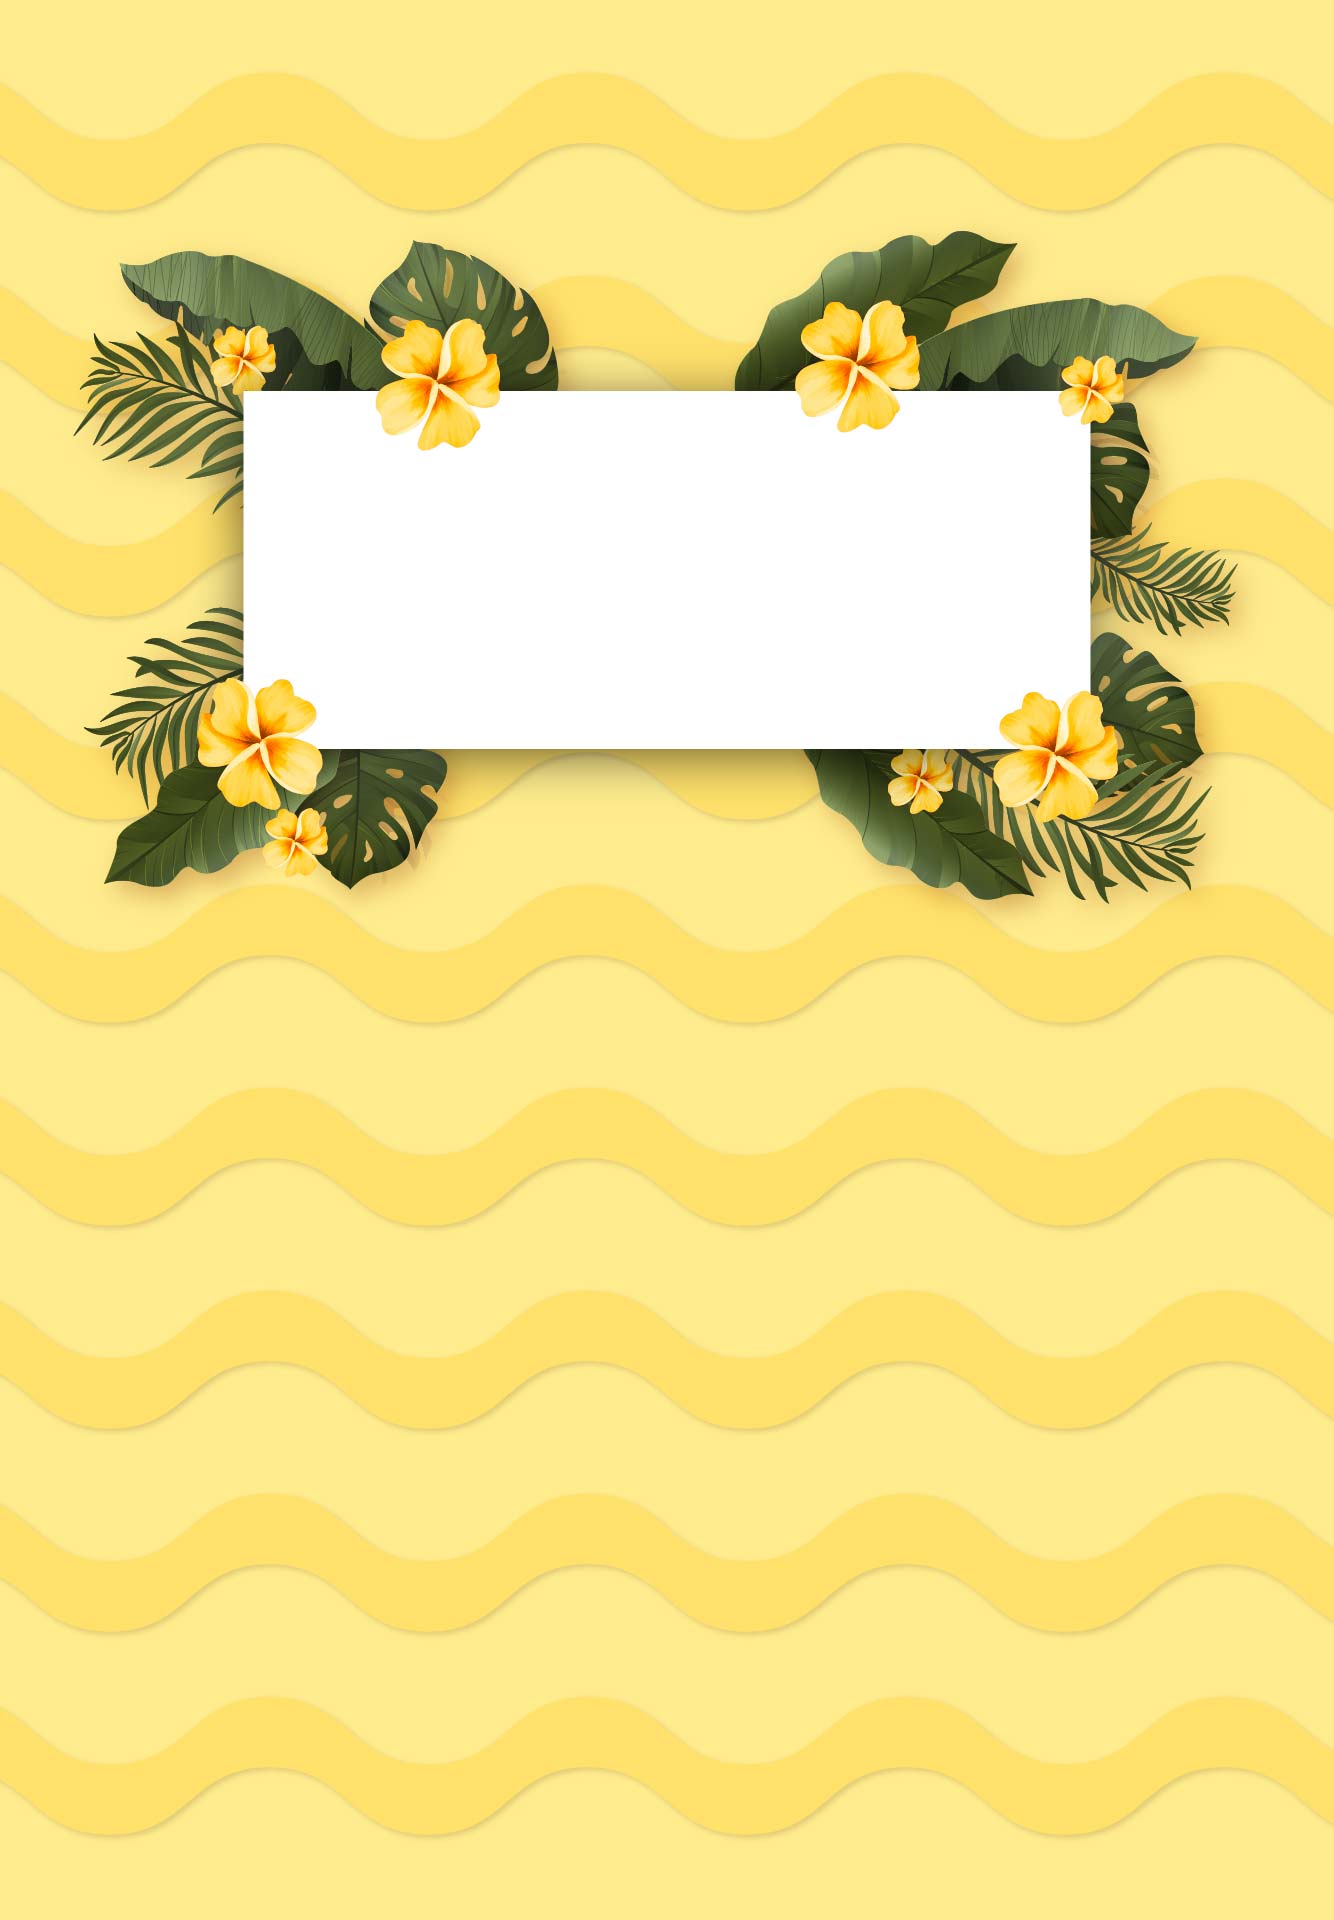 Cool Binder Cover Templates